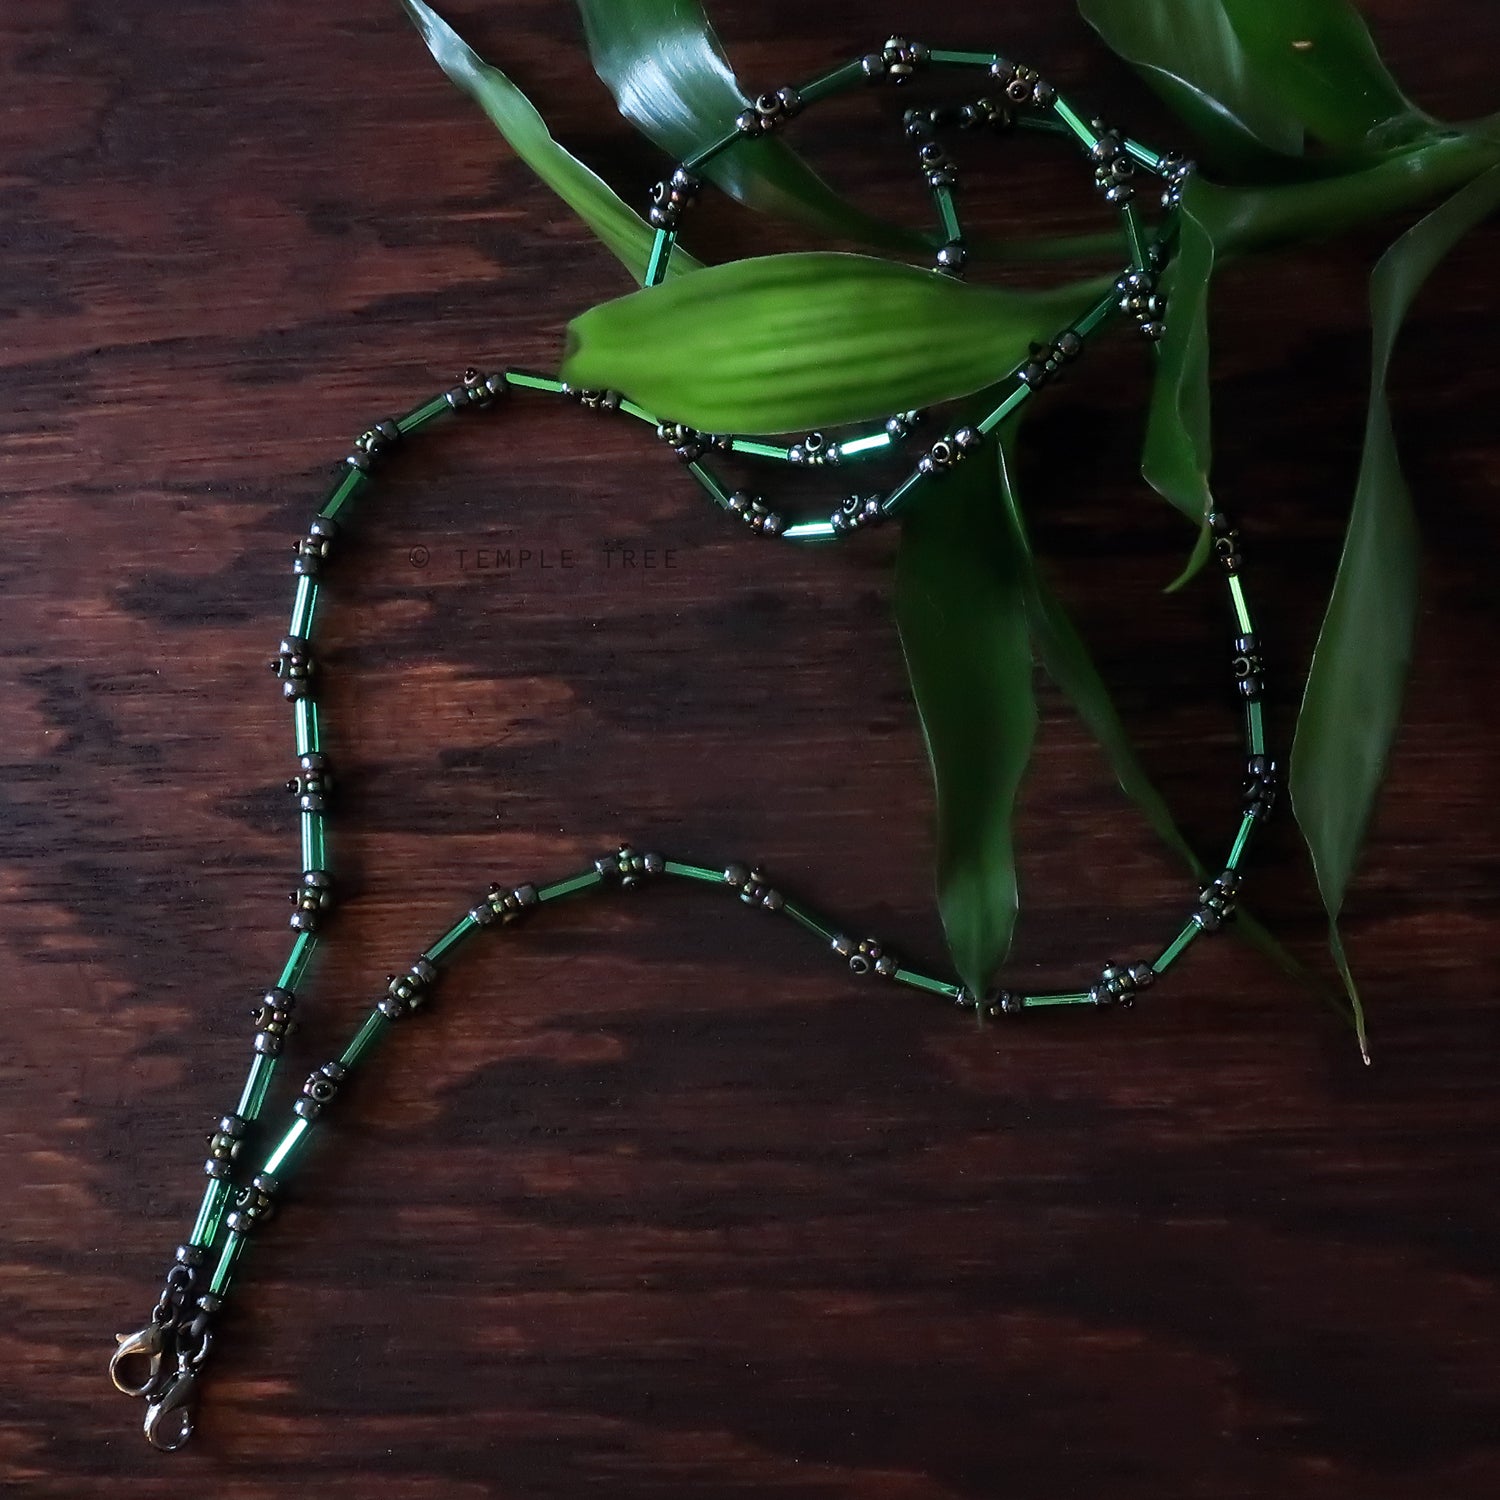 Temple Tree Lost Circuitry Beadwoven Mask Lanyard with Rivets - Green